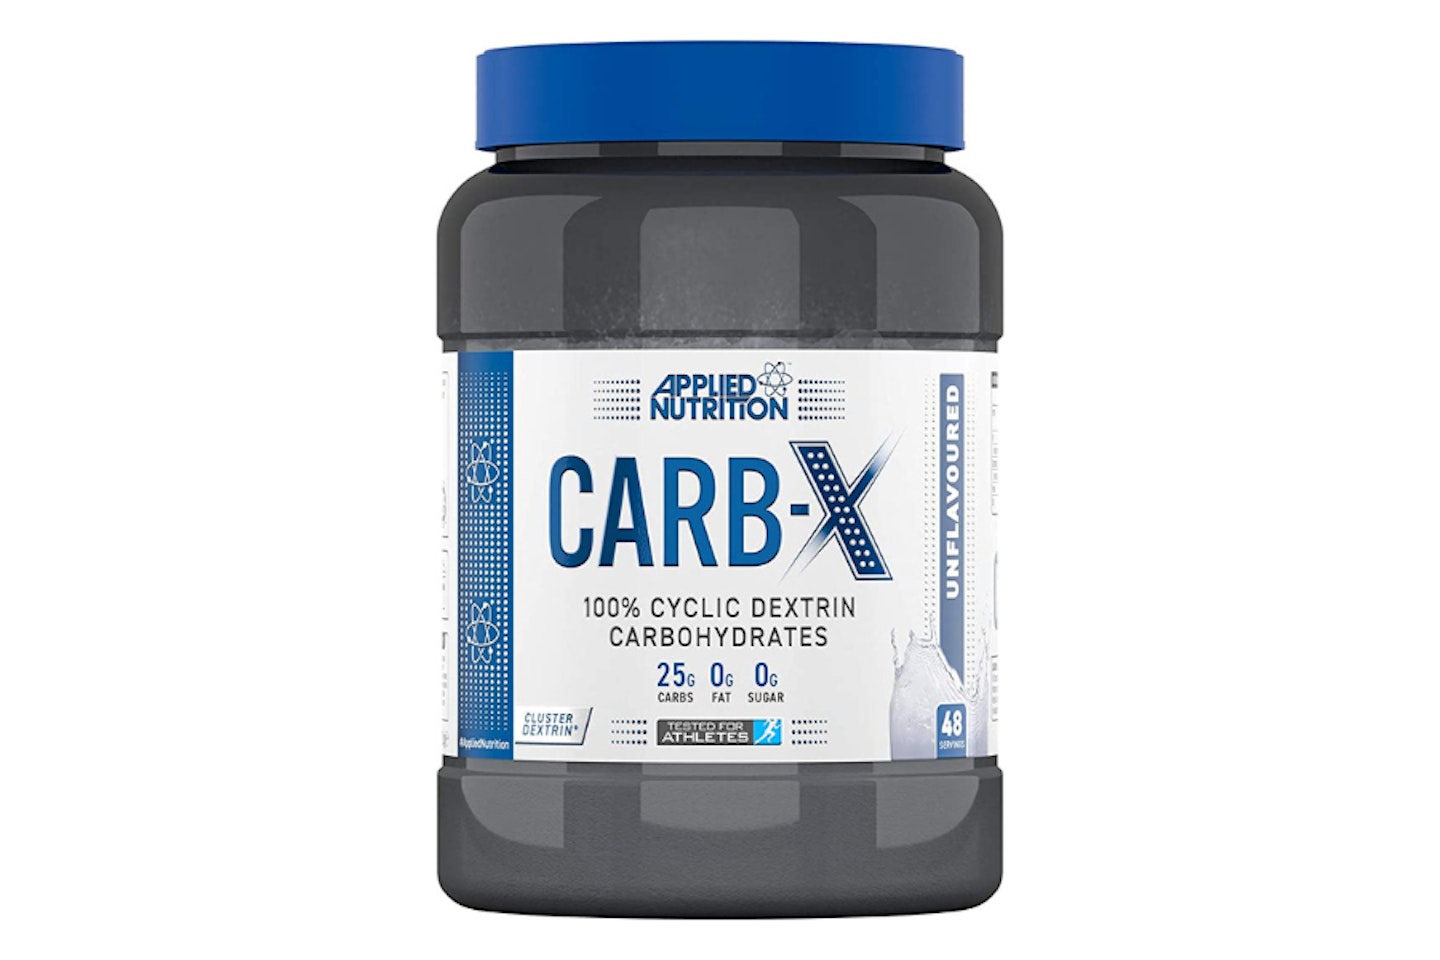 Applied Nutrition Carb X Highly Branched Cyclic Dextrin Carbohydrates